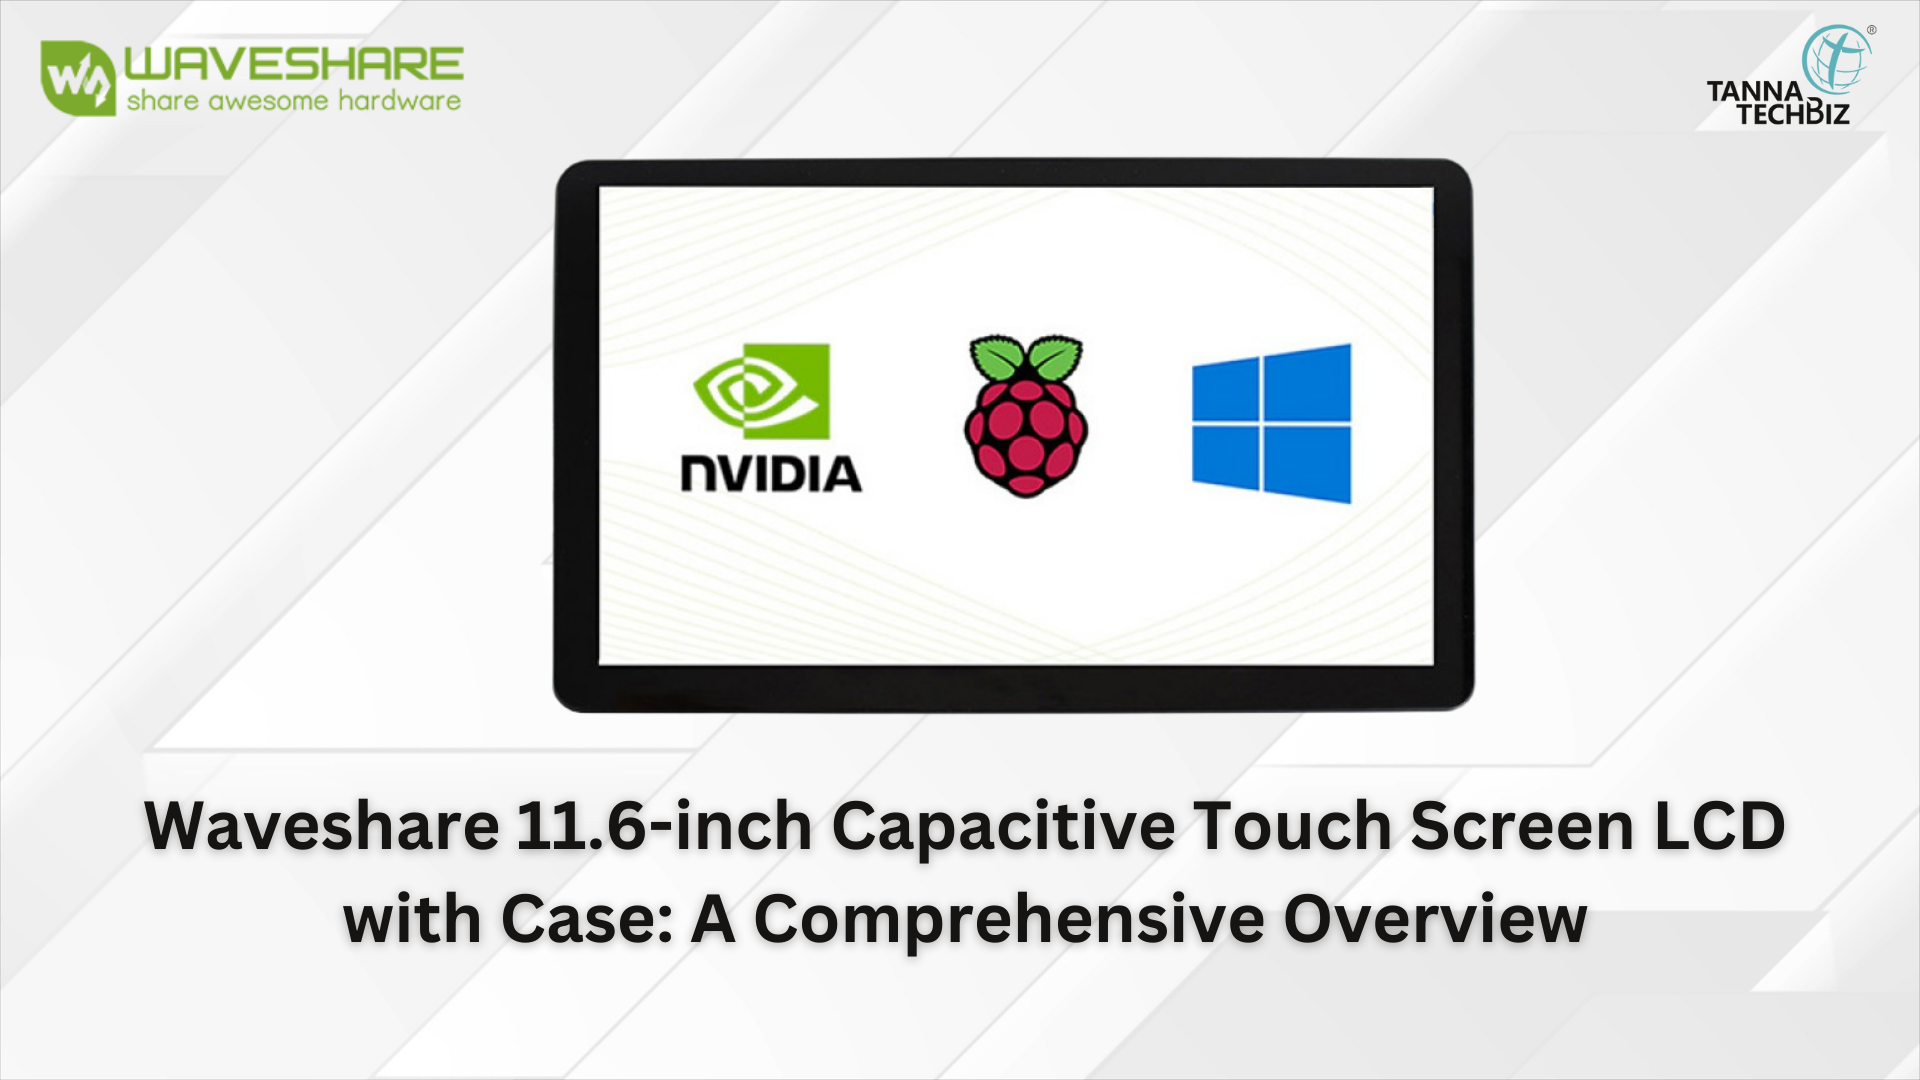  Waveshare 11.6-inch Capacitive Touch Screen LCD with Case: A Comprehensive Overview